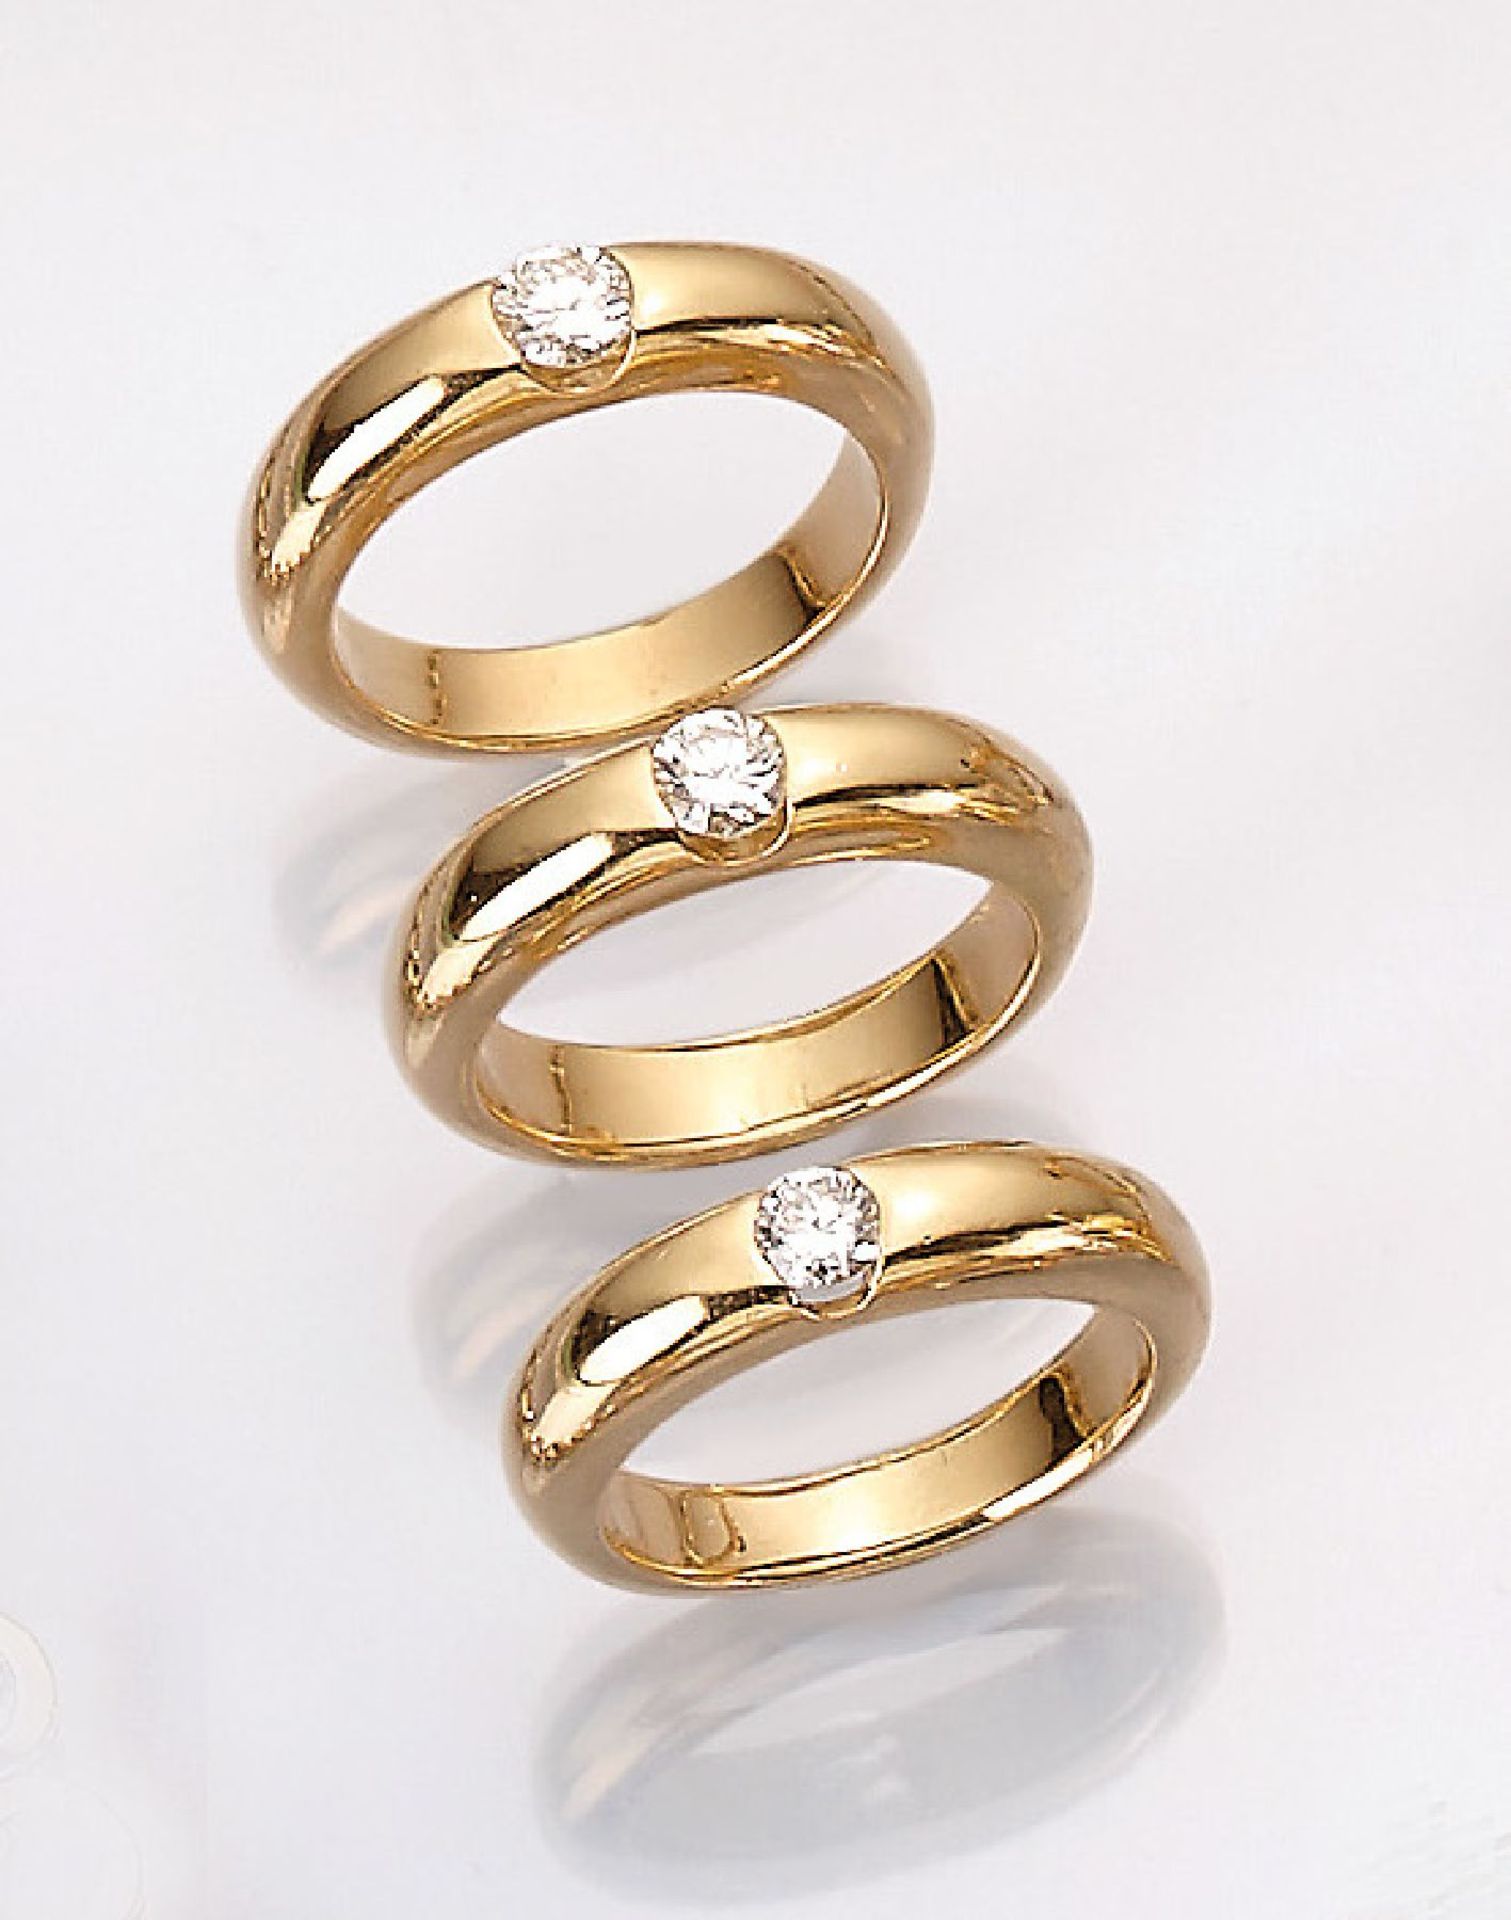 18 kt gold ringtrio with brilliants , YG 750/000, 3 brilliants total approx. 1.0 ct (engraved: 0.